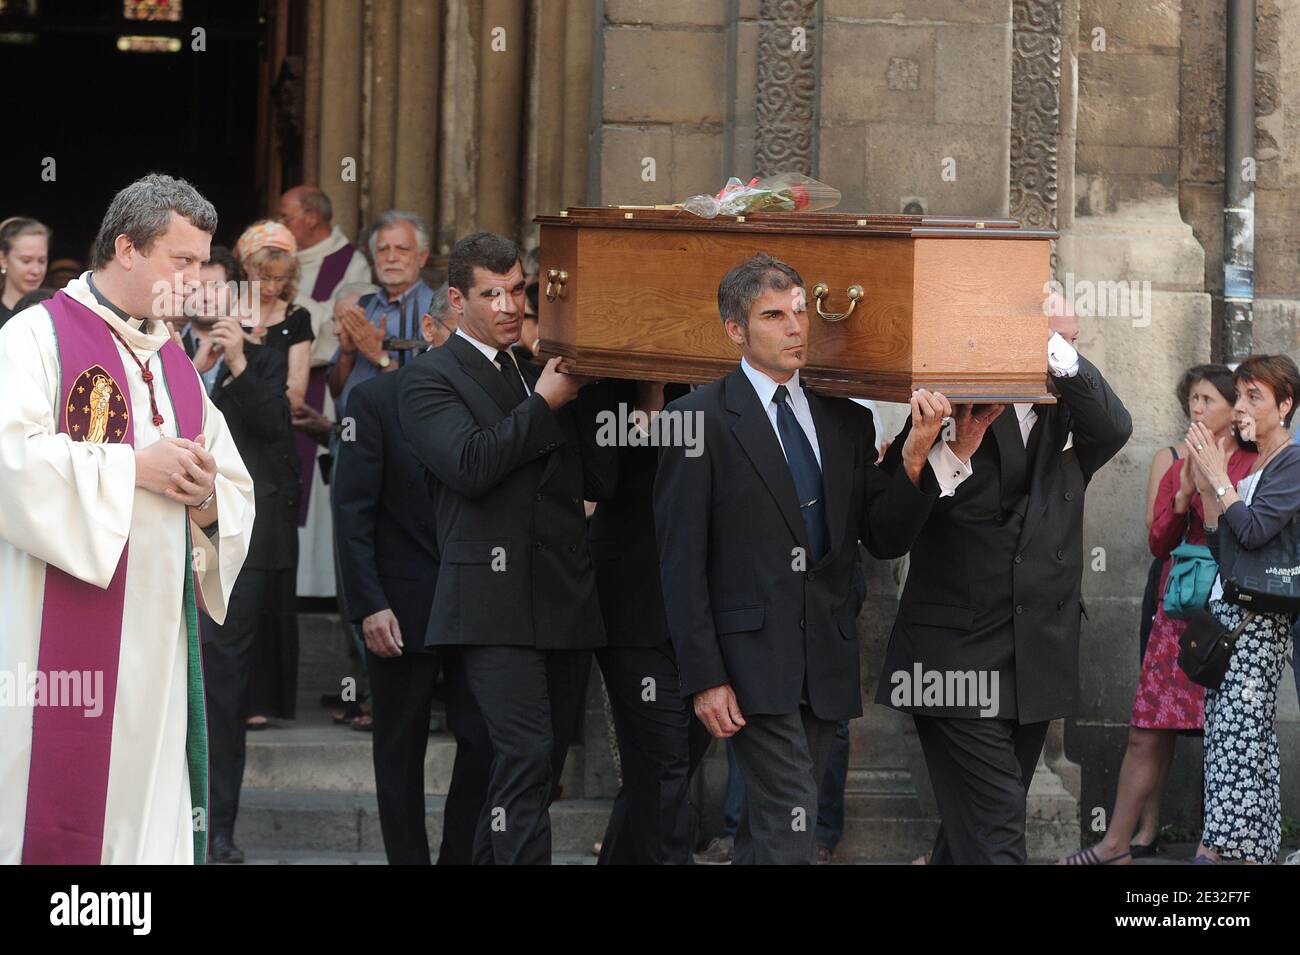 Atmosphere during the funerals of Laurent Terzieff at the Eglise St Germain in Paris, France on July 7, 2010. Photo by Giancarlo Gorassini/ABACAPRESS.COM Stock Photo